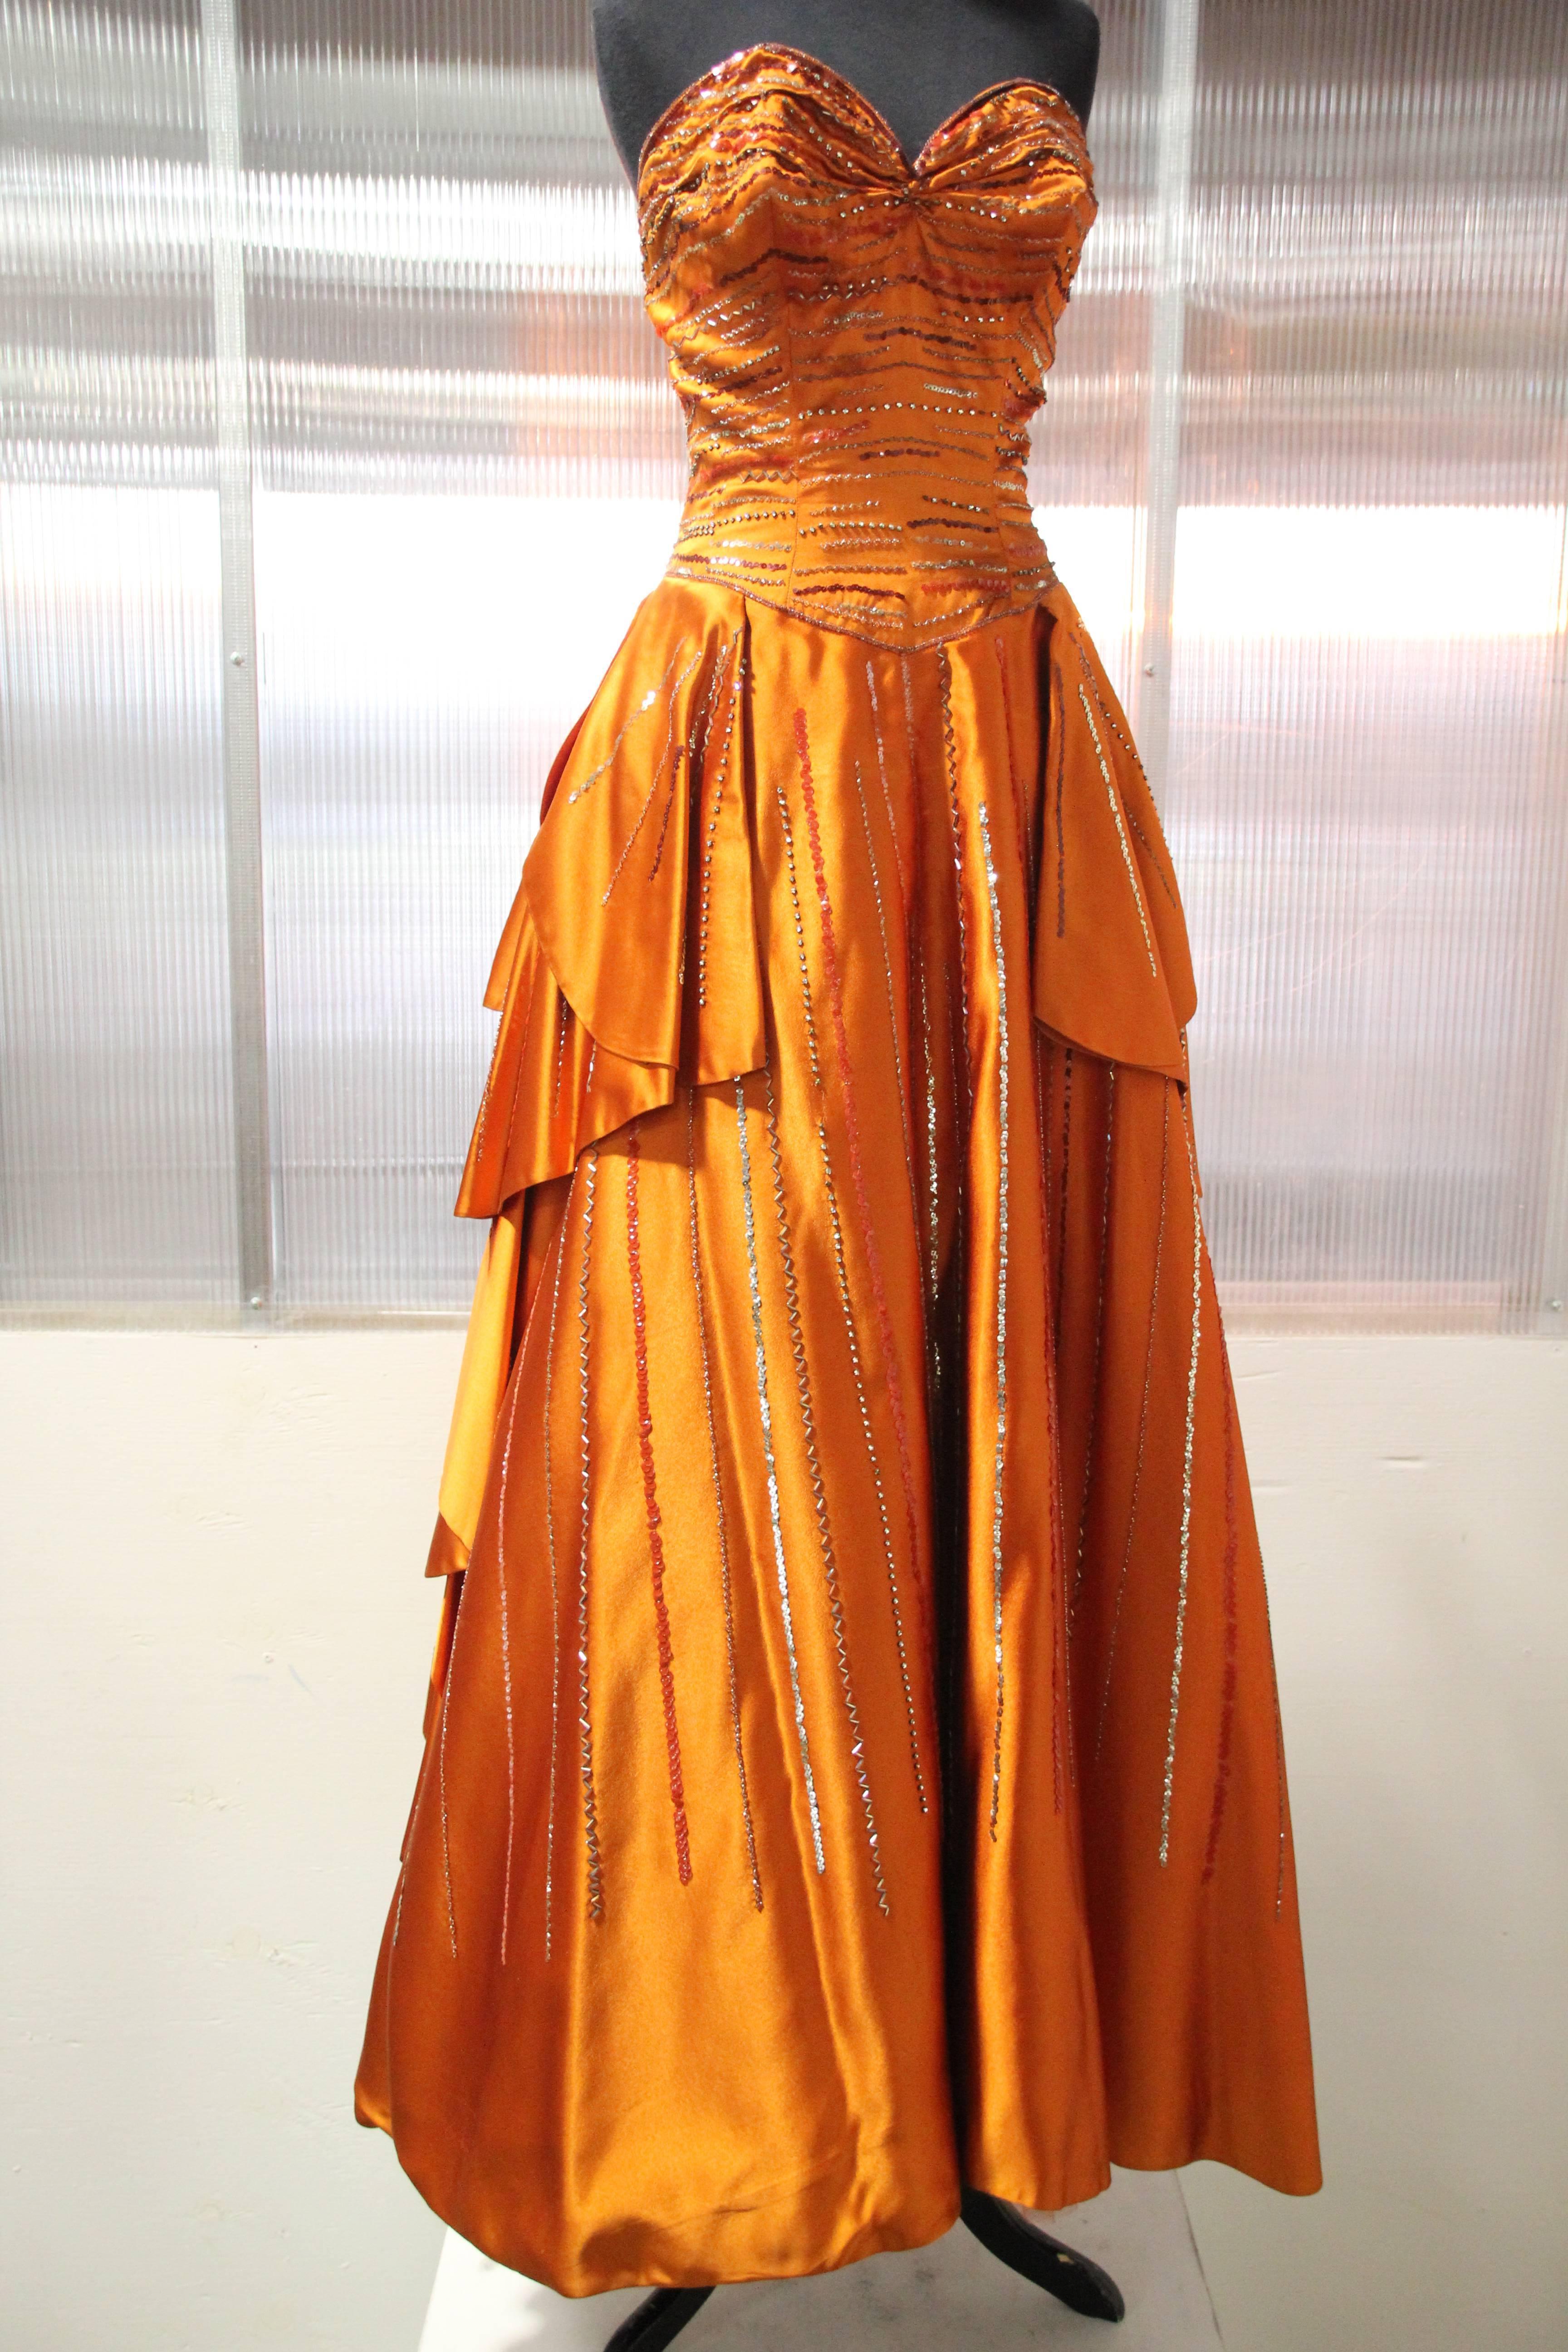 1950s MGM Mme. Etoile by Irene Sharaff couture ball gown in deep persimmon silk satin: Irene Sharaff, 5-time Academy Award Winner for costume design, made this gown for an anonymous MGM star client. This rare and pristine ball gown is constructed in